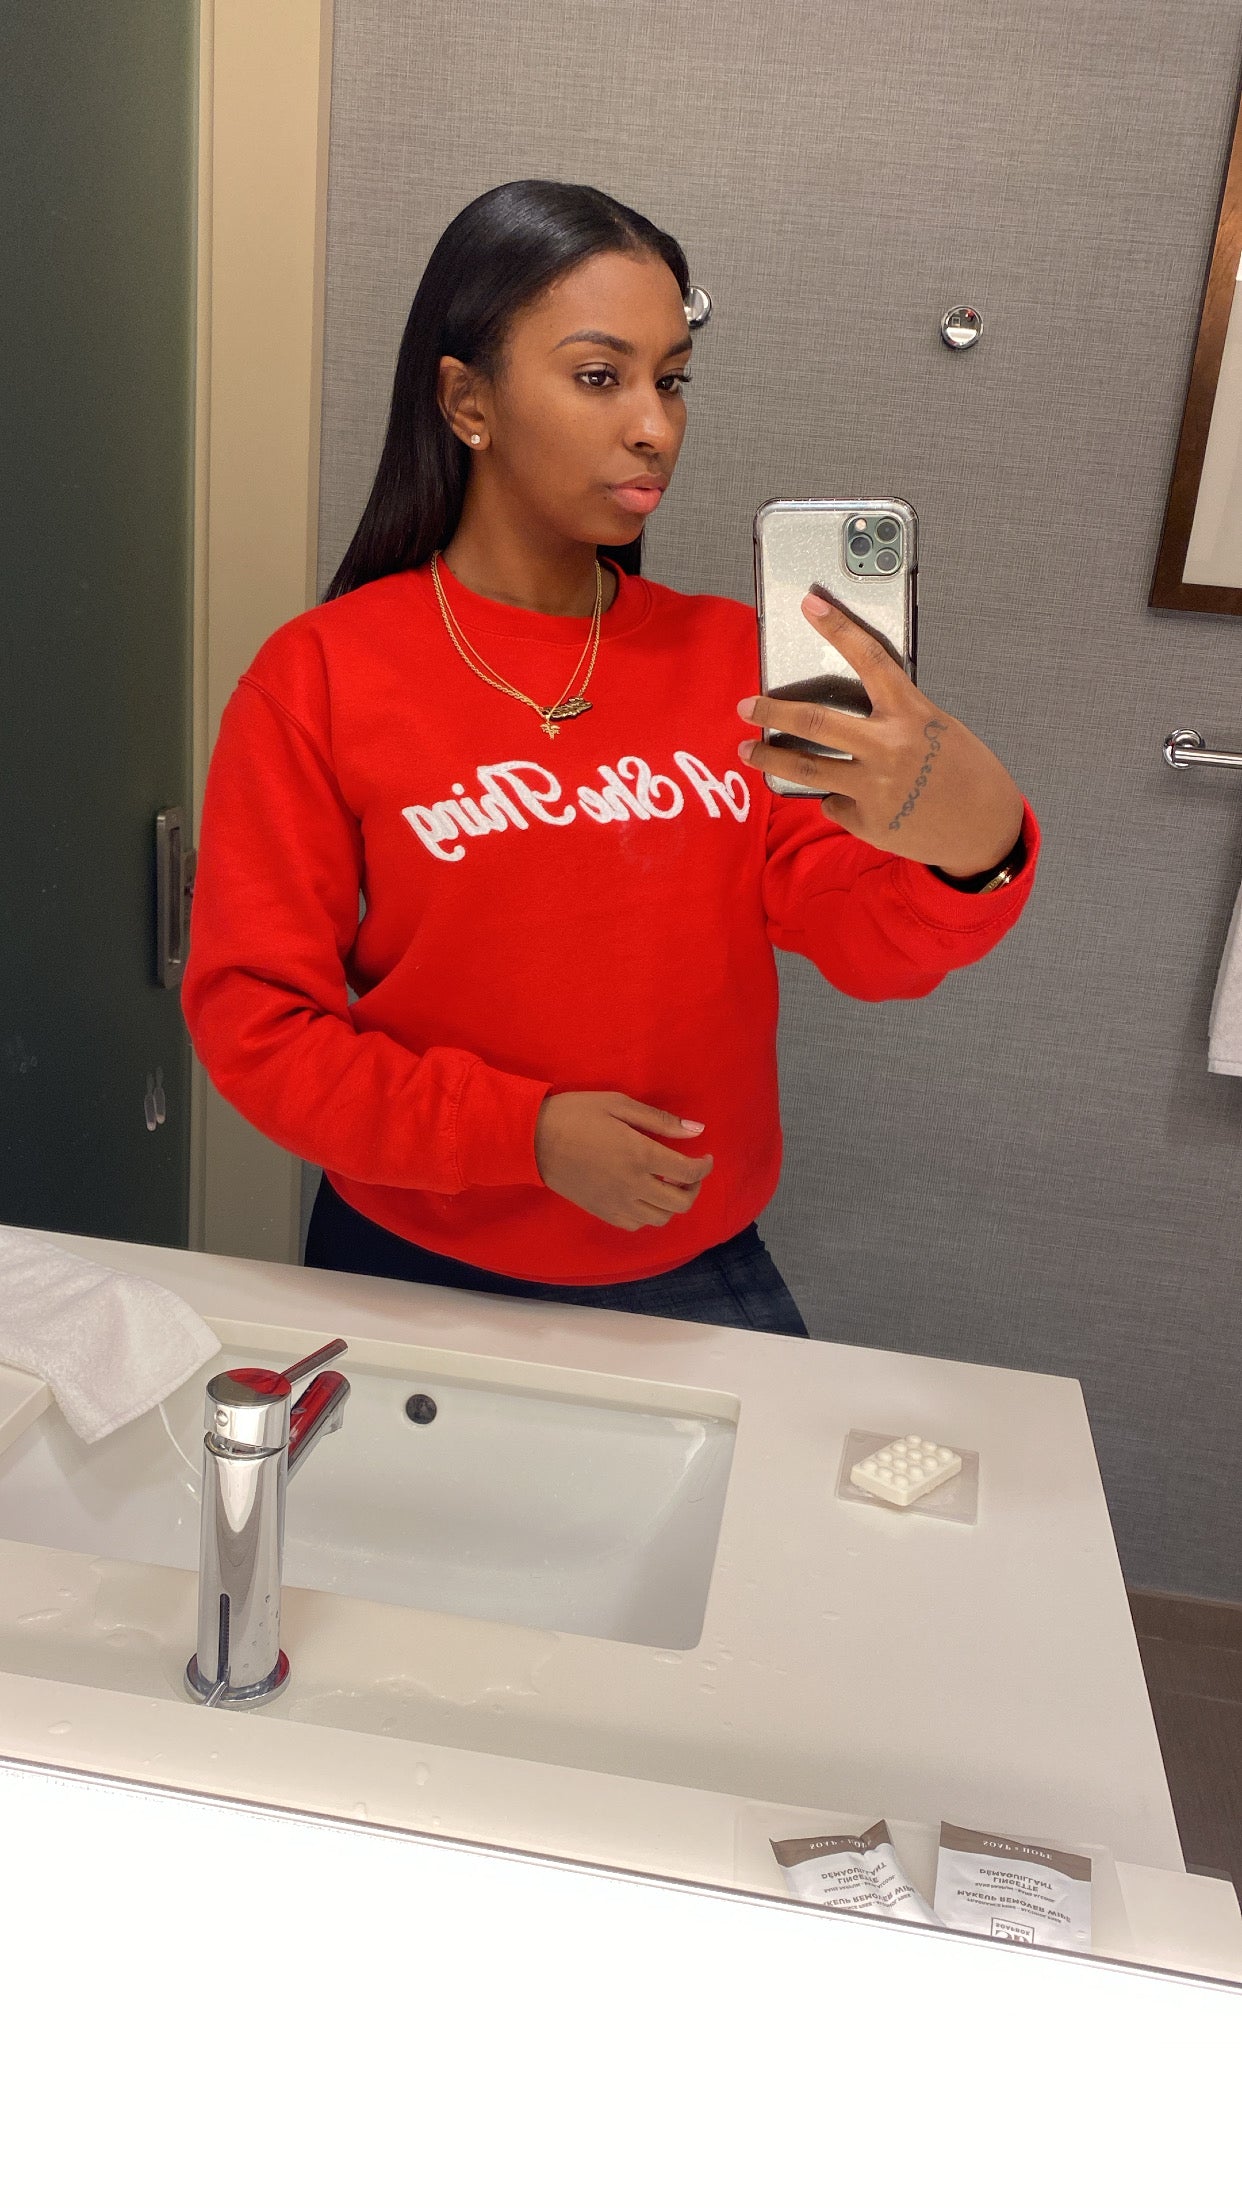 A She Thing Crewneck